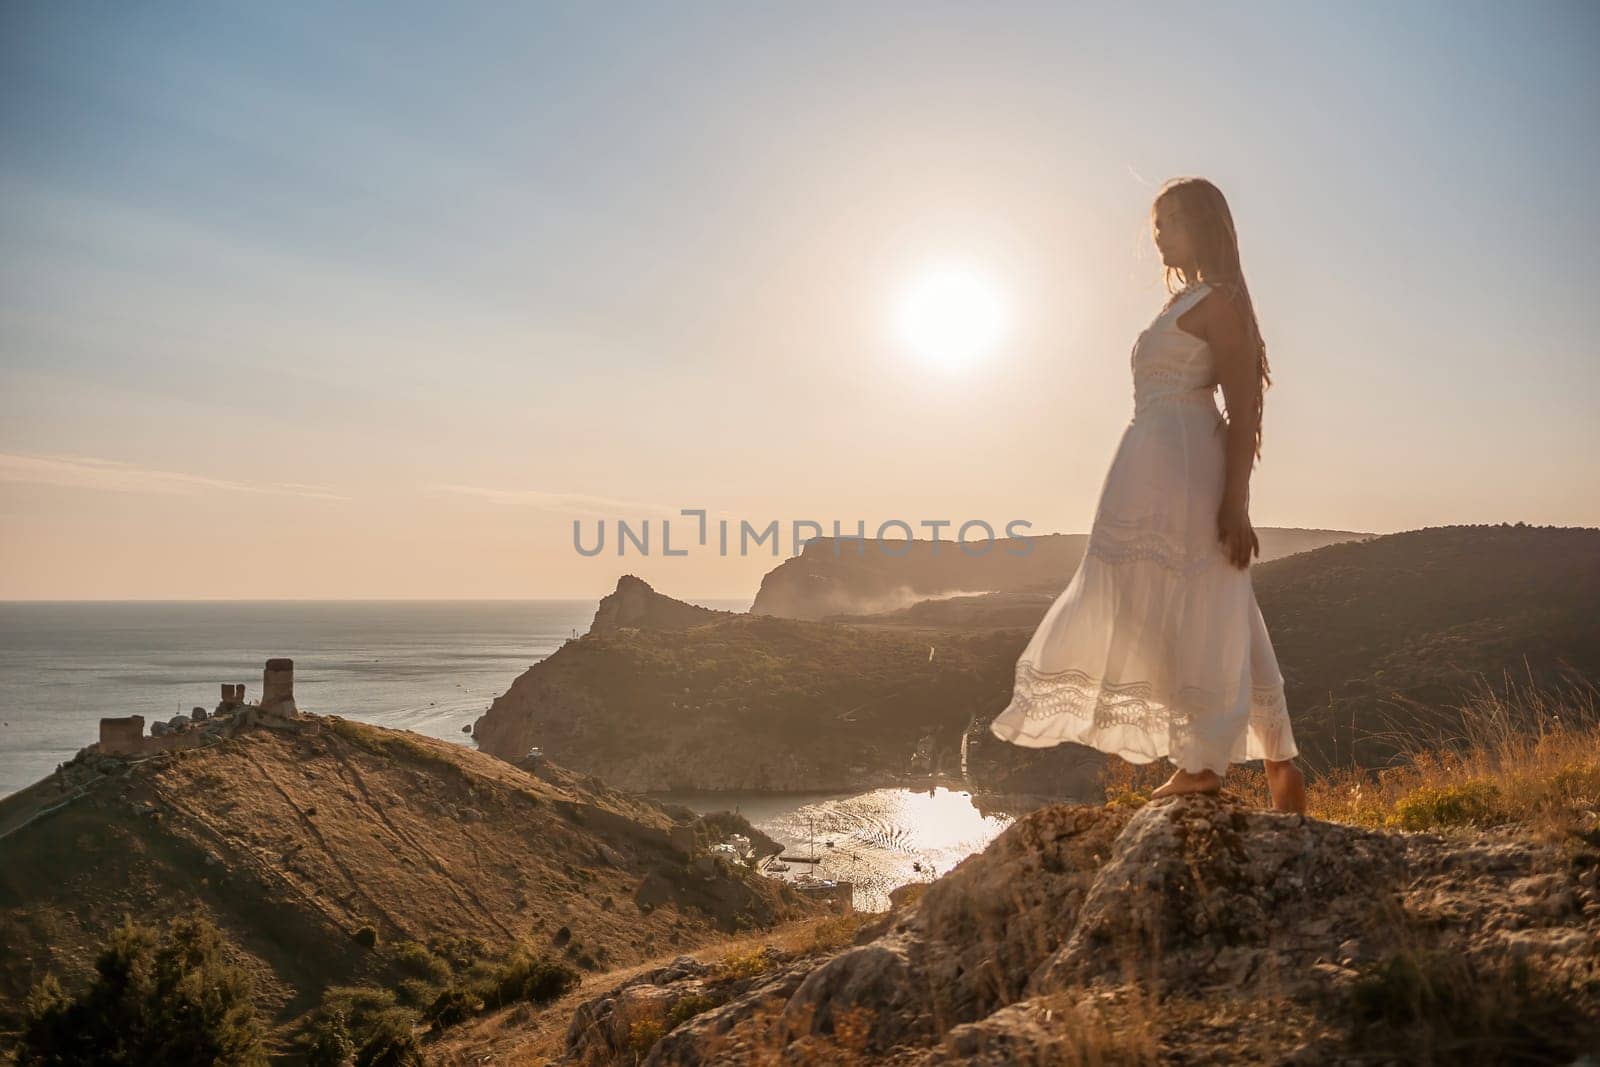 A woman stands on a rocky hill overlooking the ocean. She is wearing a white dress and she is enjoying the view. The scene is serene and peaceful, with the sun shining brightly in the background. by Matiunina